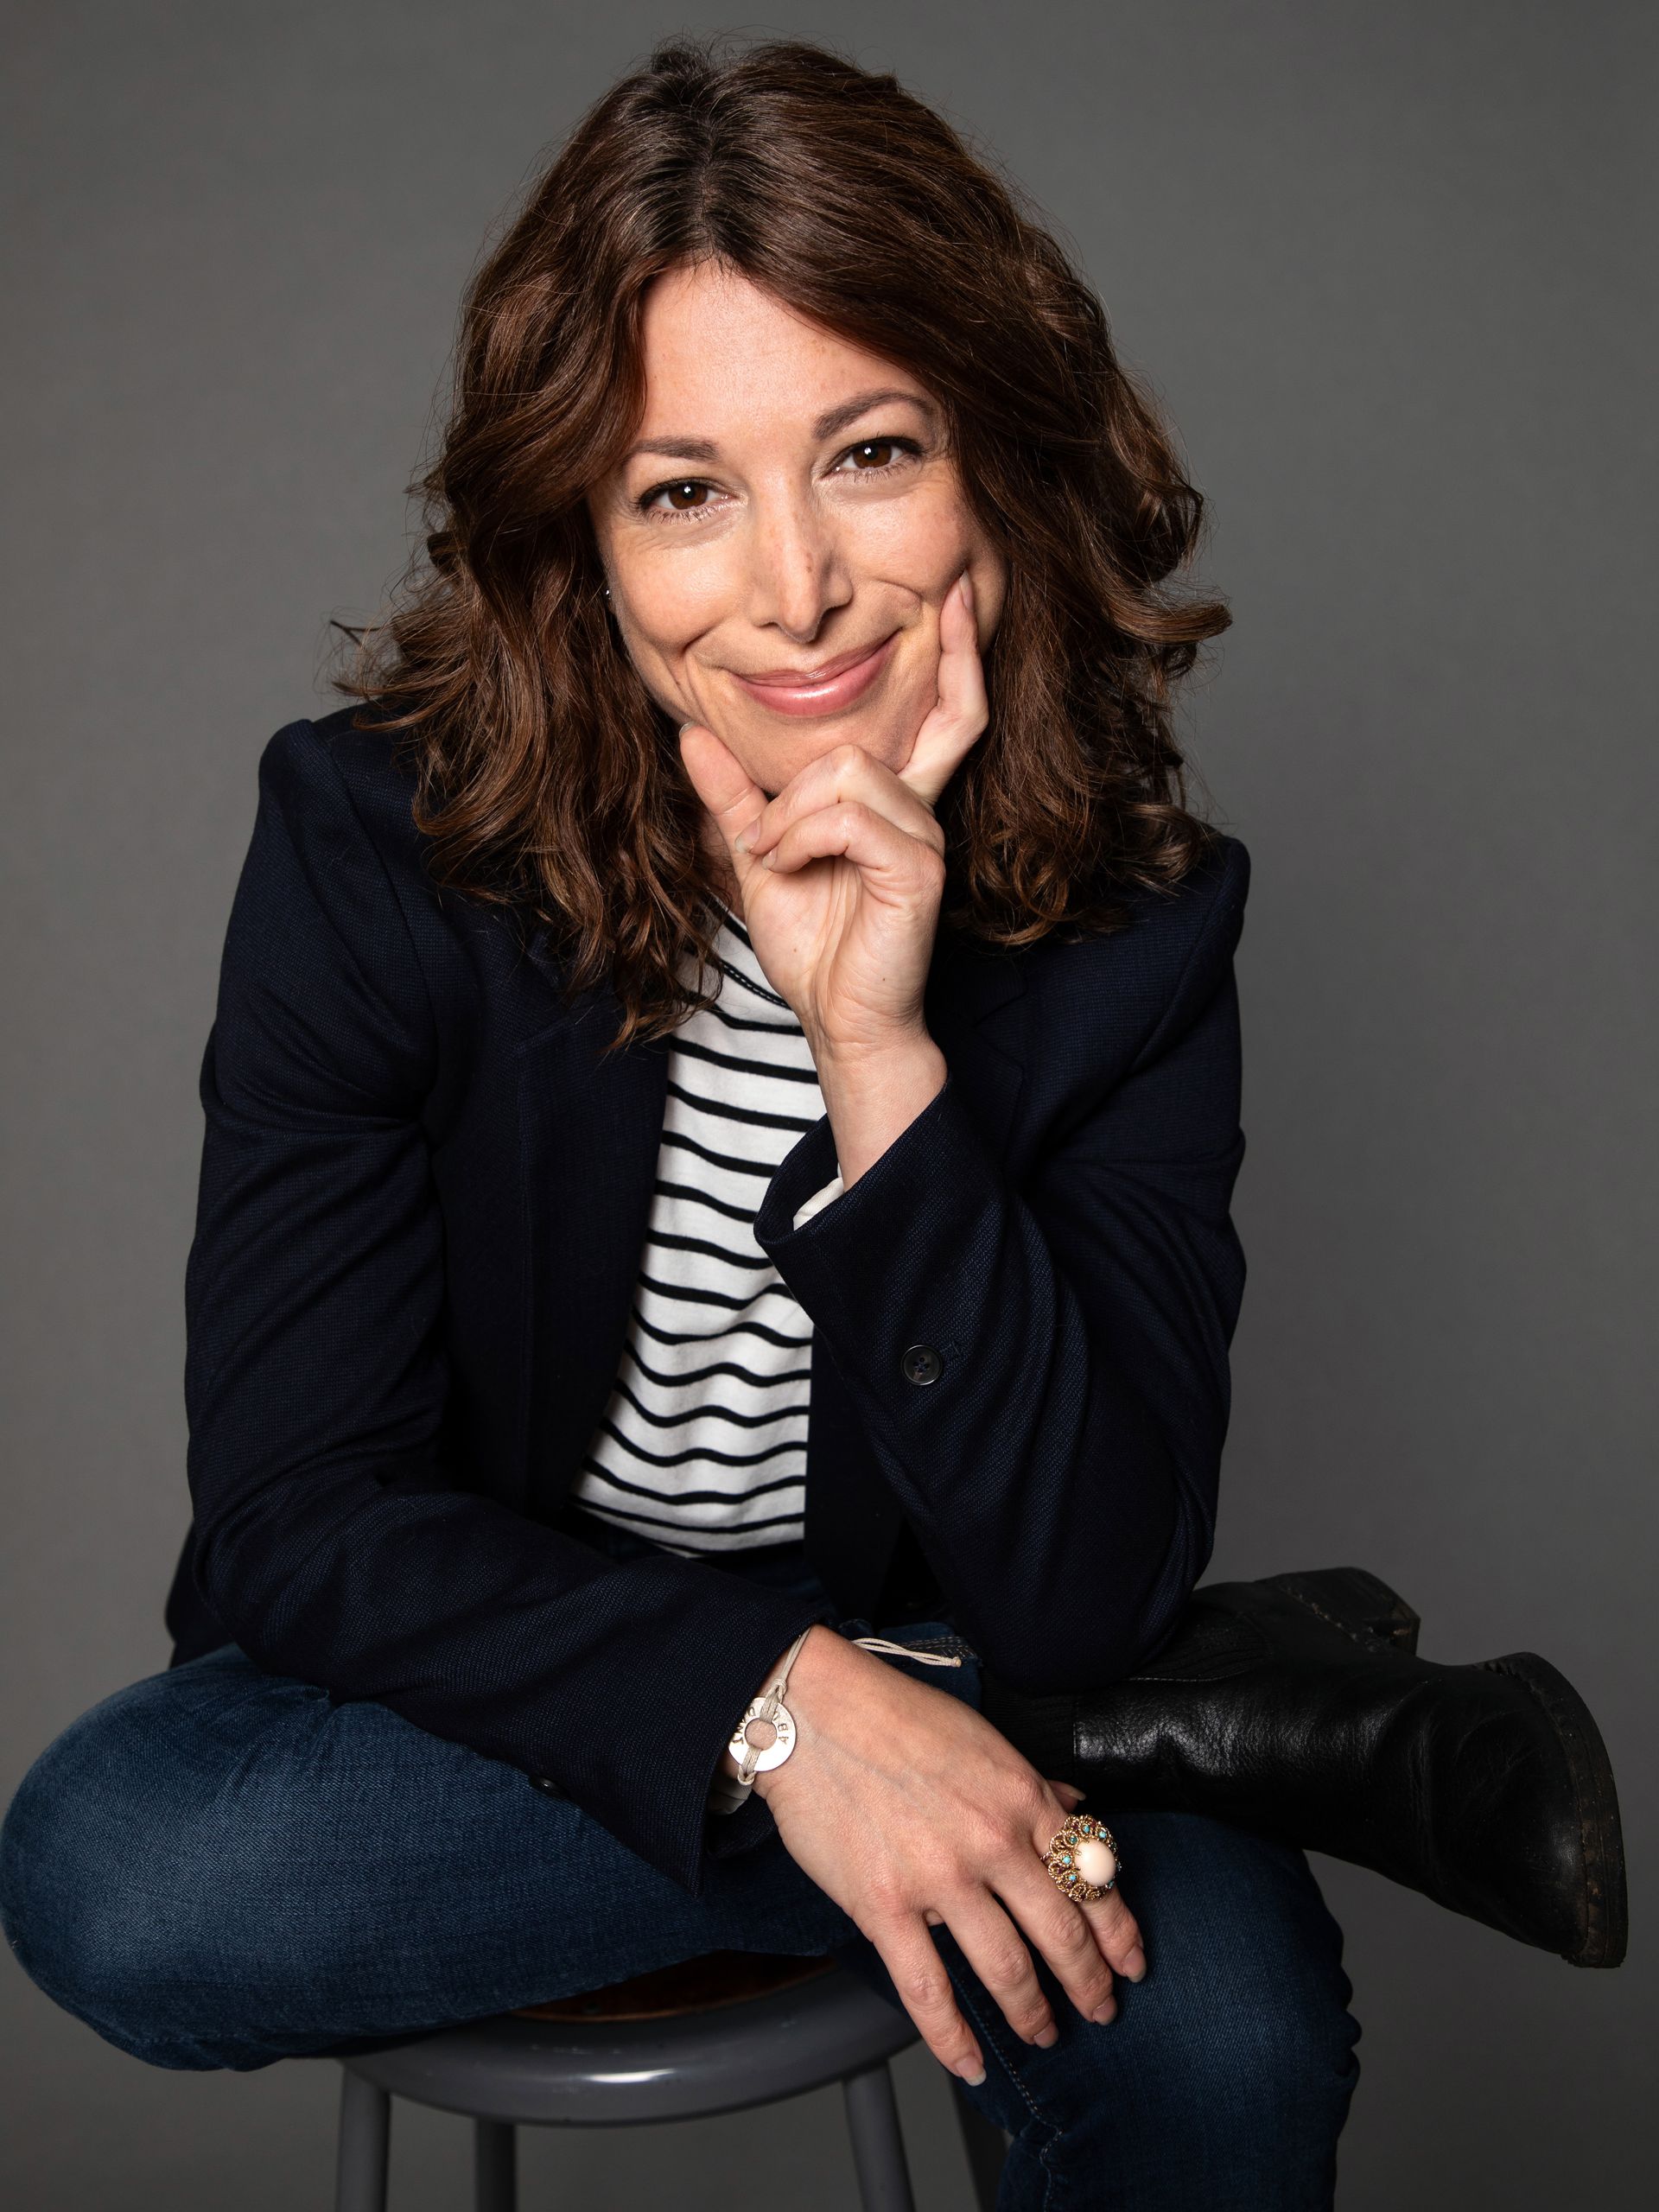 Image description: a woman with shoulder length curly brown hair sits on a stool against a gray background. Her right ankle rests on her left knee as she smiles warmly, chin in her hand and looks directly at the camera. She's dressed in a black blazer, with a black and white striped T-shirt, jeans and black ankle boots. She wears a large ring and bracelet. 